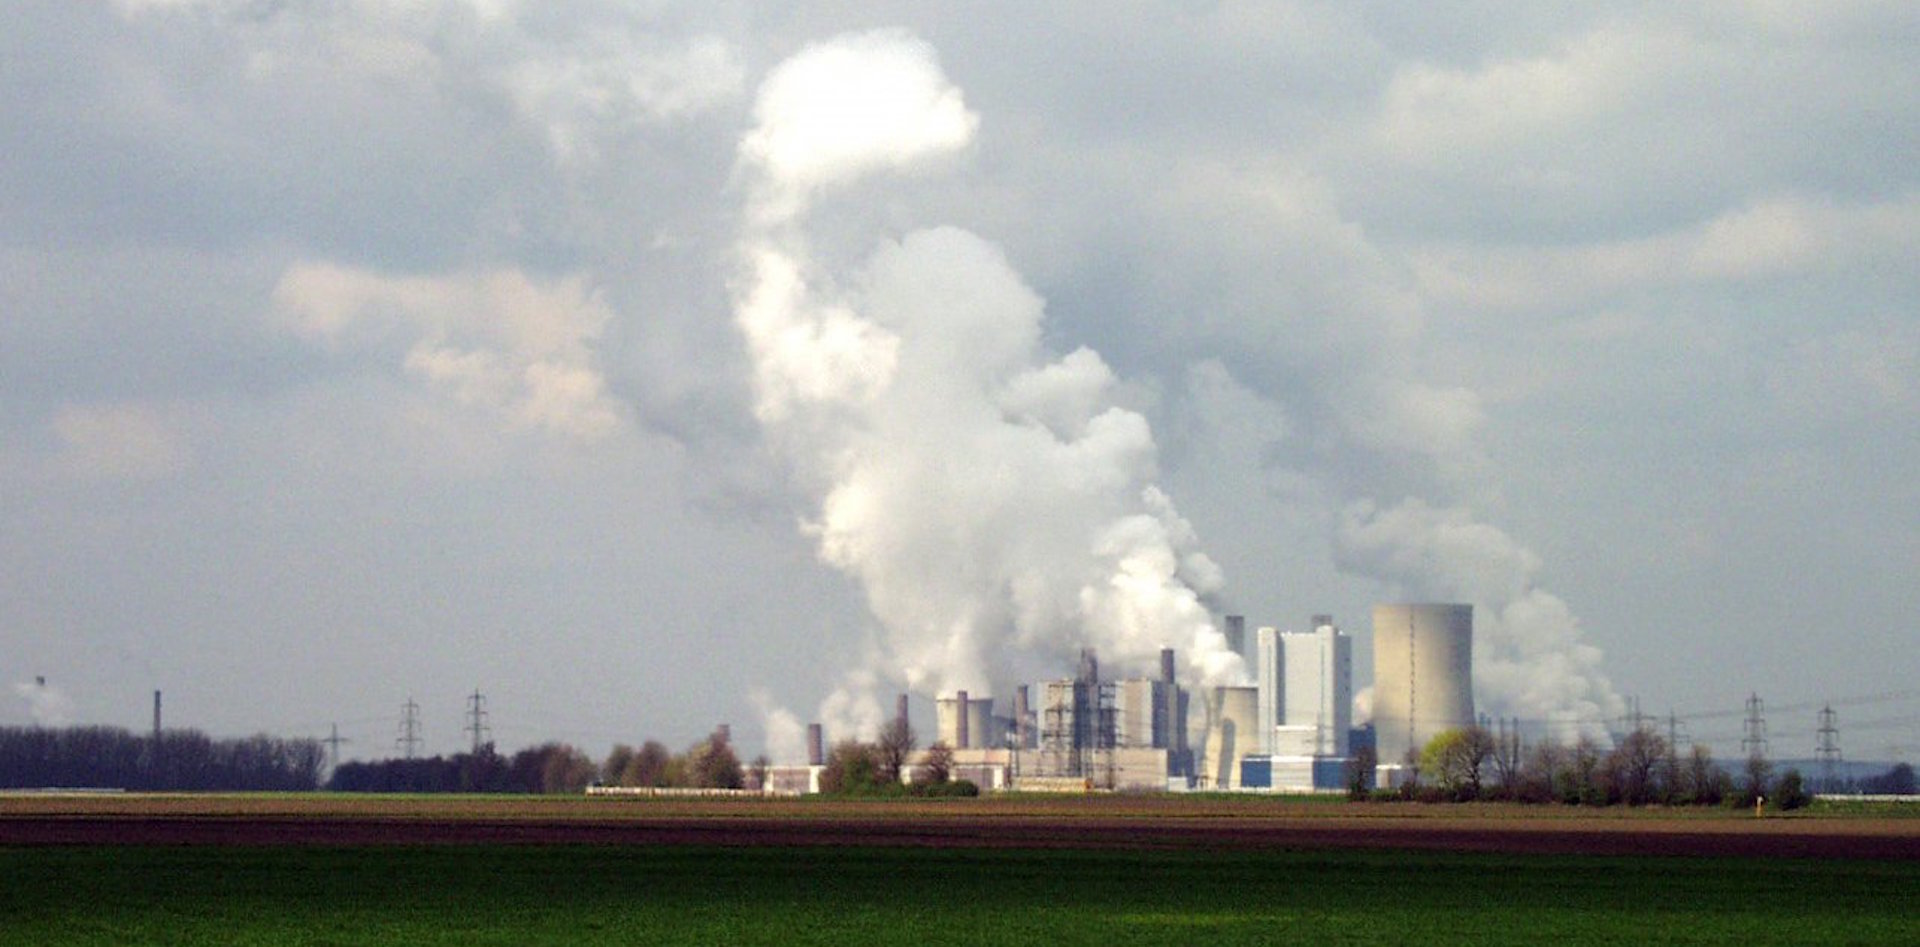 A large coal plant seen from far away, with clouds of steam rising from it